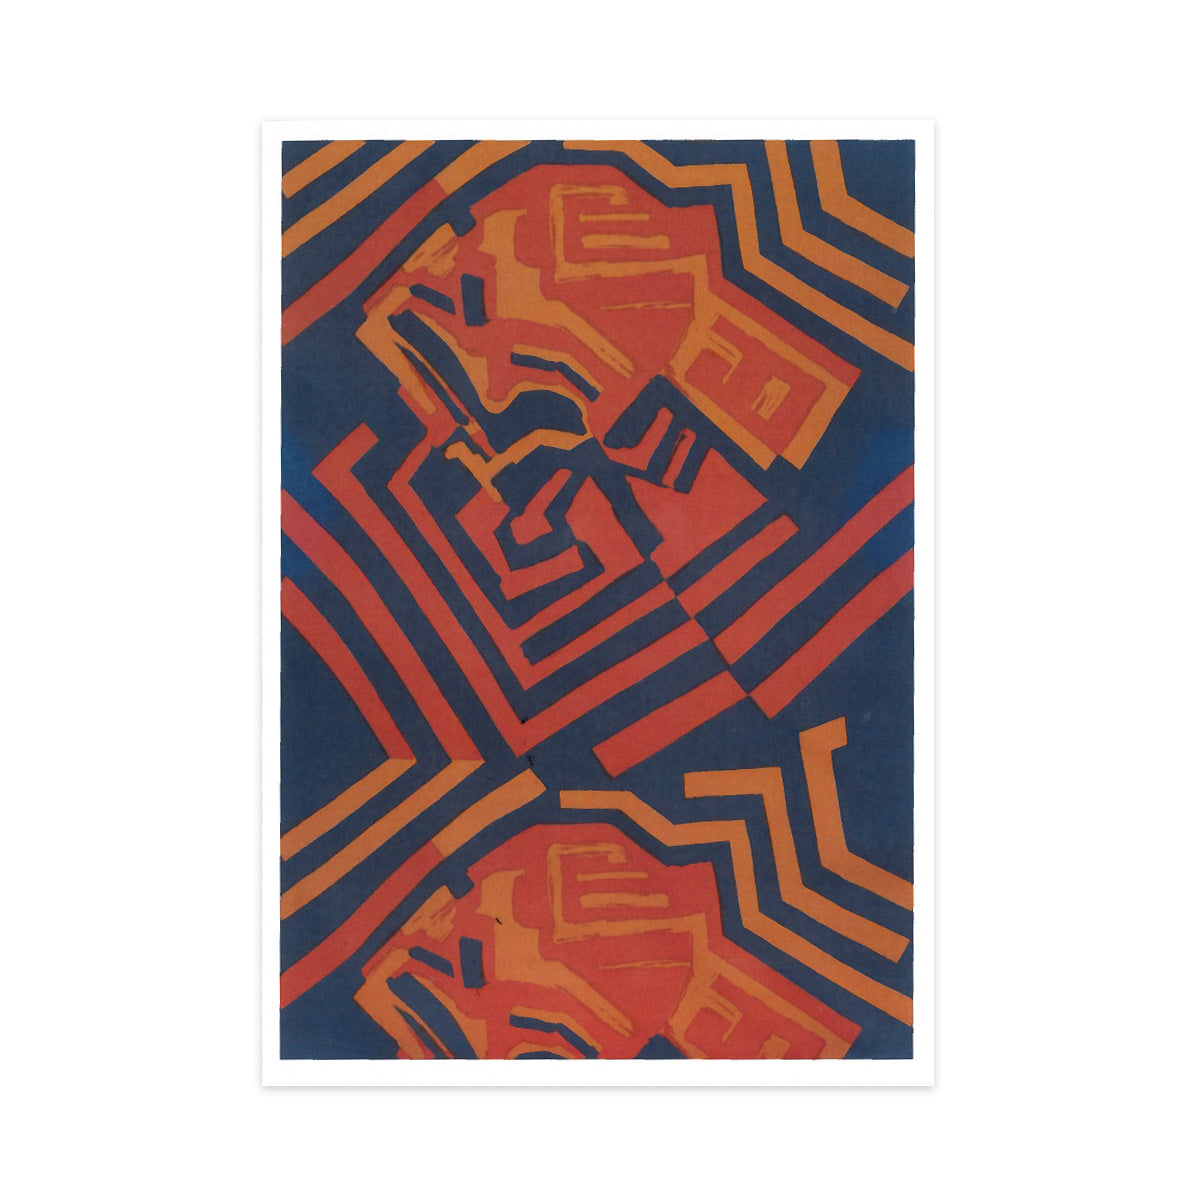 Greetings card featuring a navy and orange geometric design by Shirley Craven.